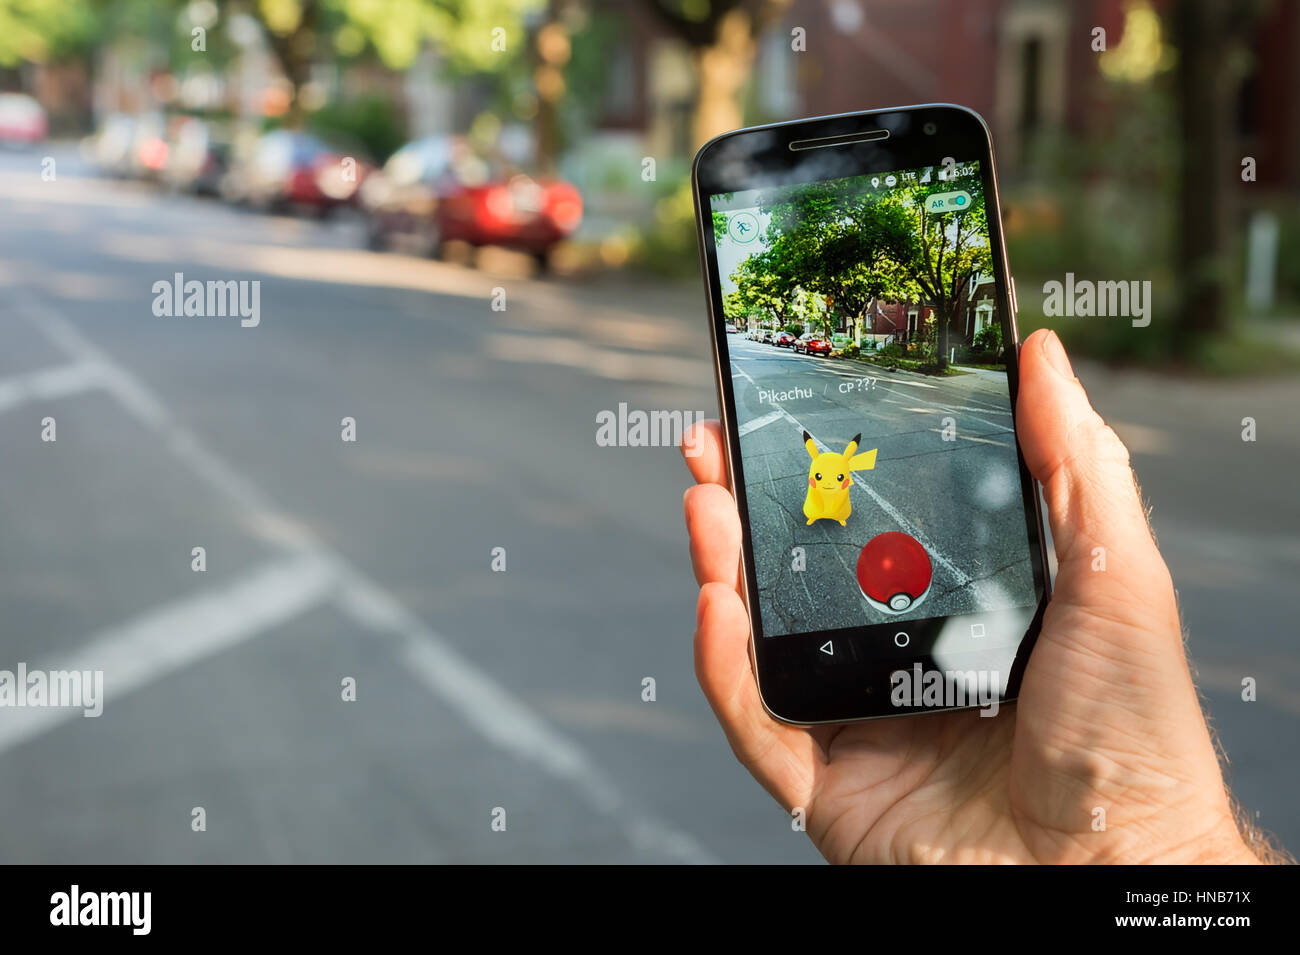 Royalty-Free photo: Person holds smartphone with Pokemon Go application  running